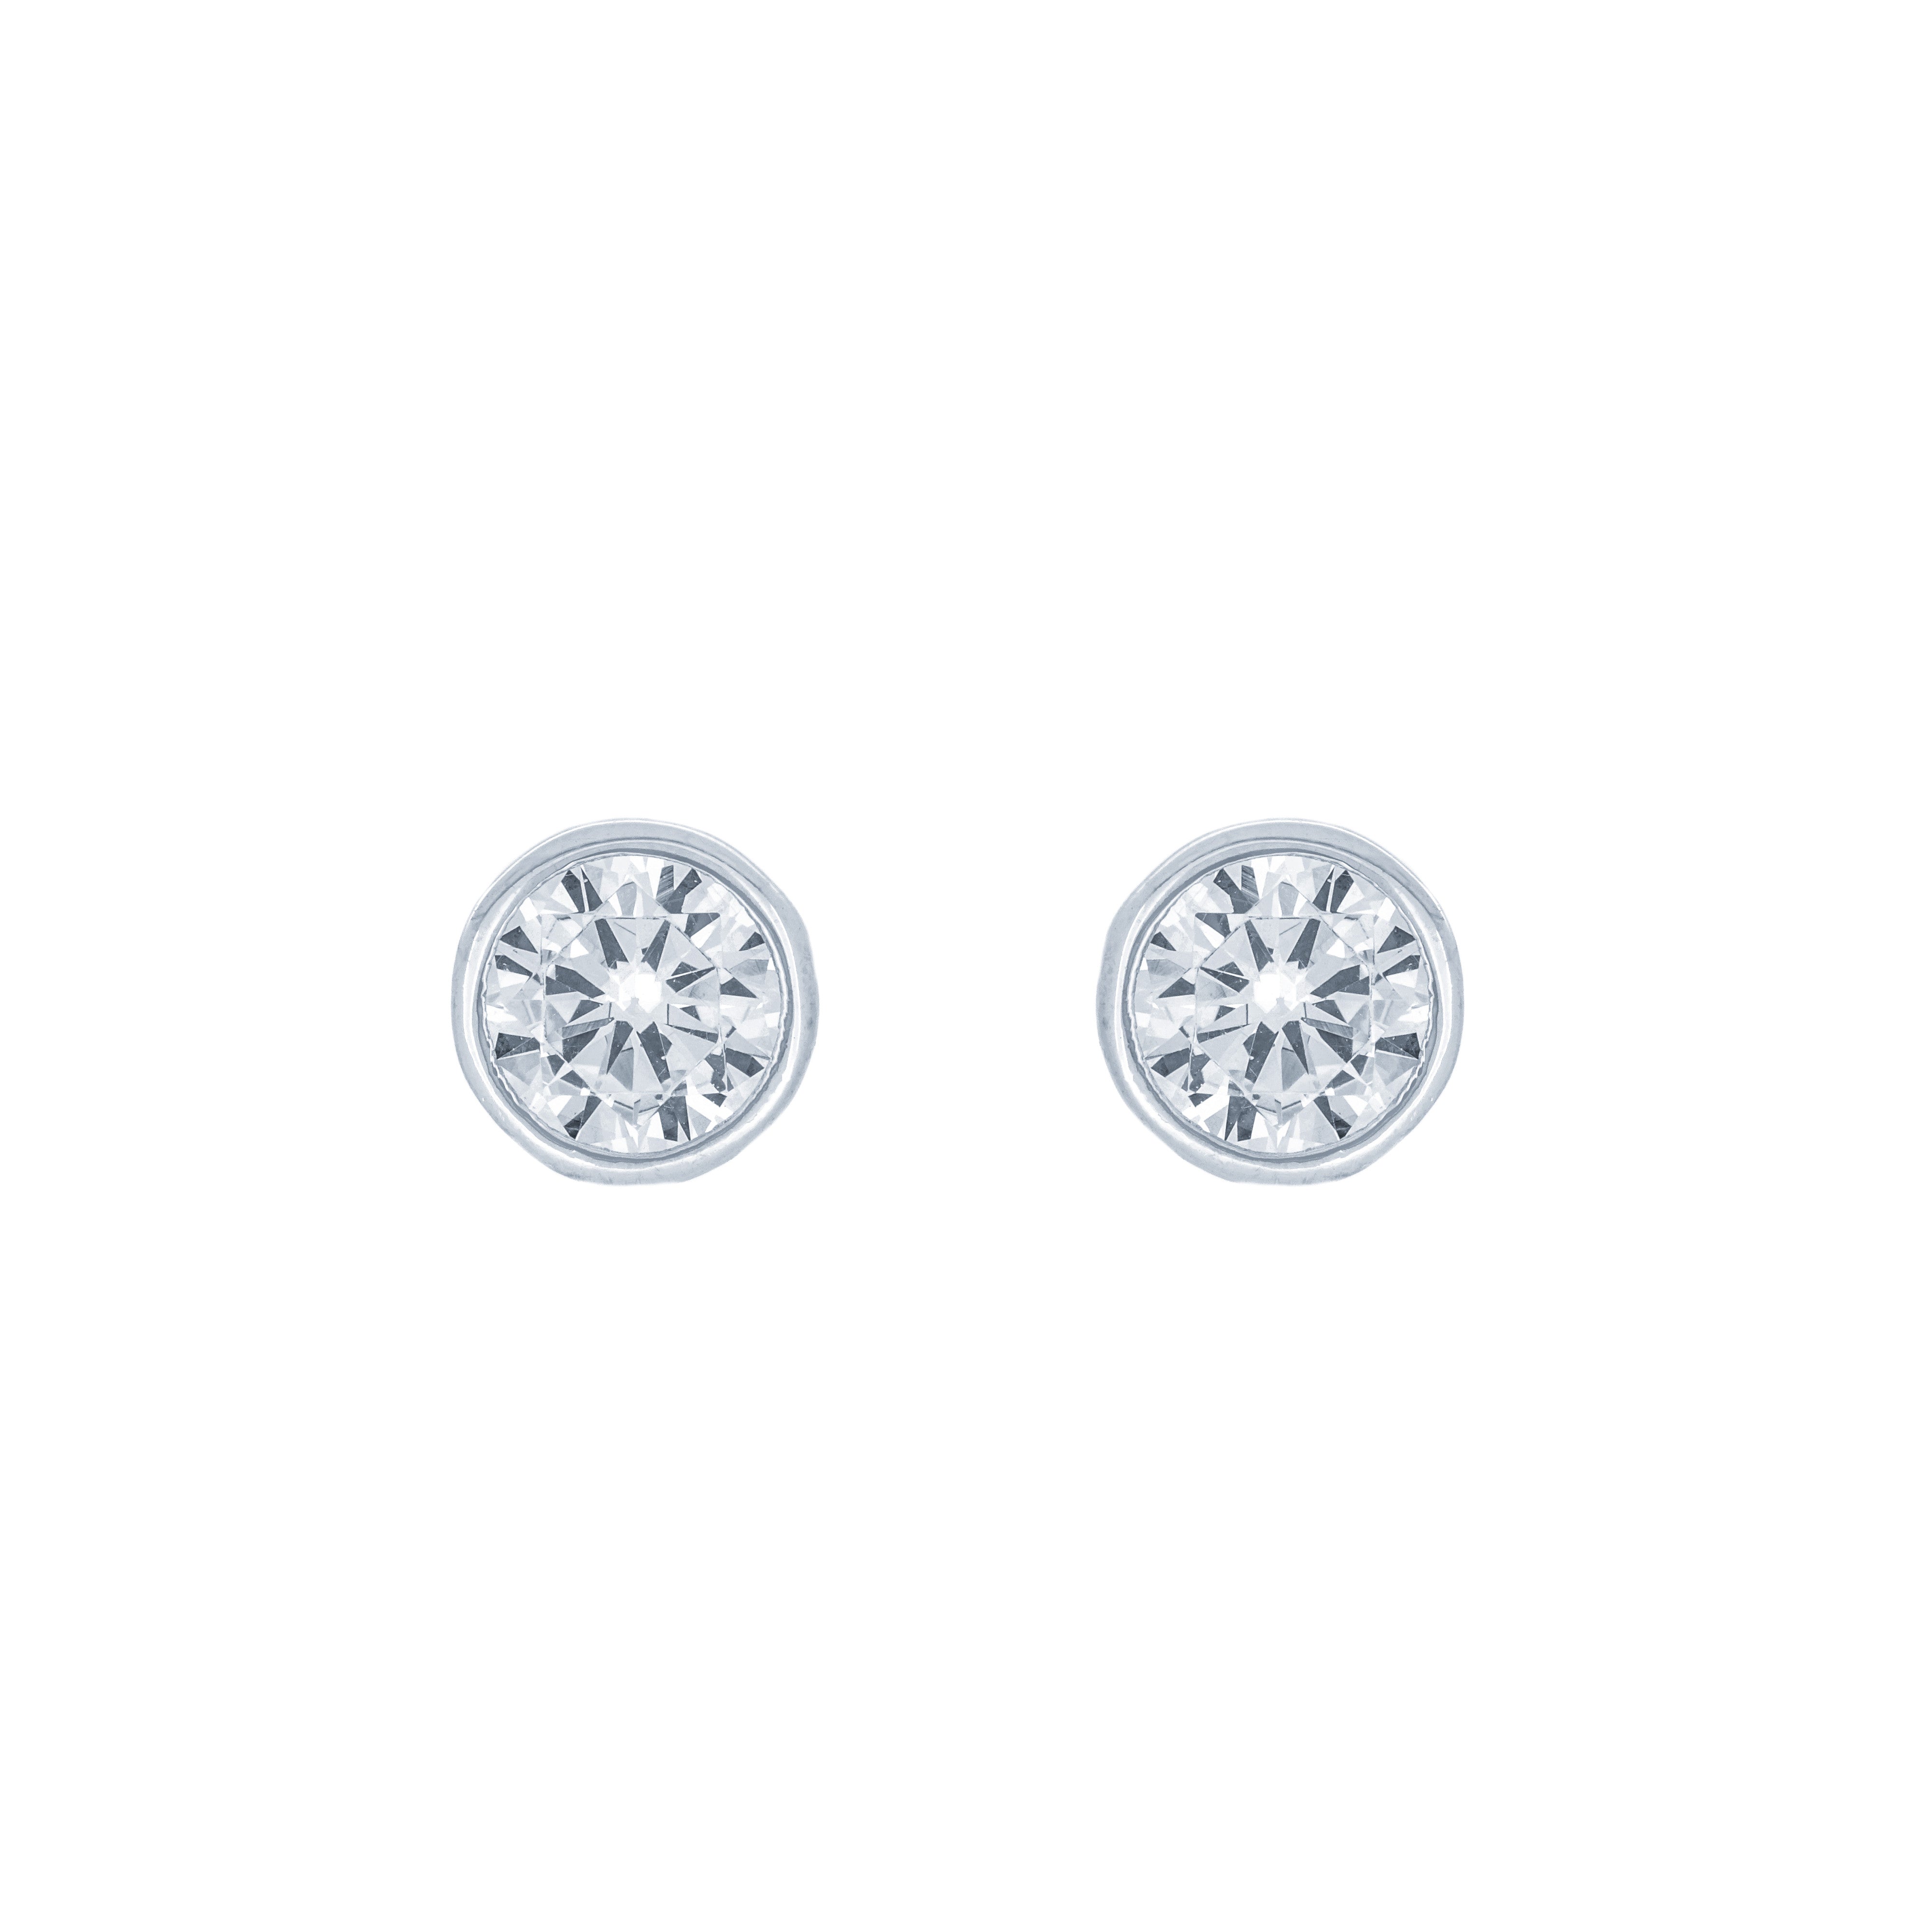 (100061) Round Cut 6mm White Cubic Zirconia Stud Earrings In Sterling Silver